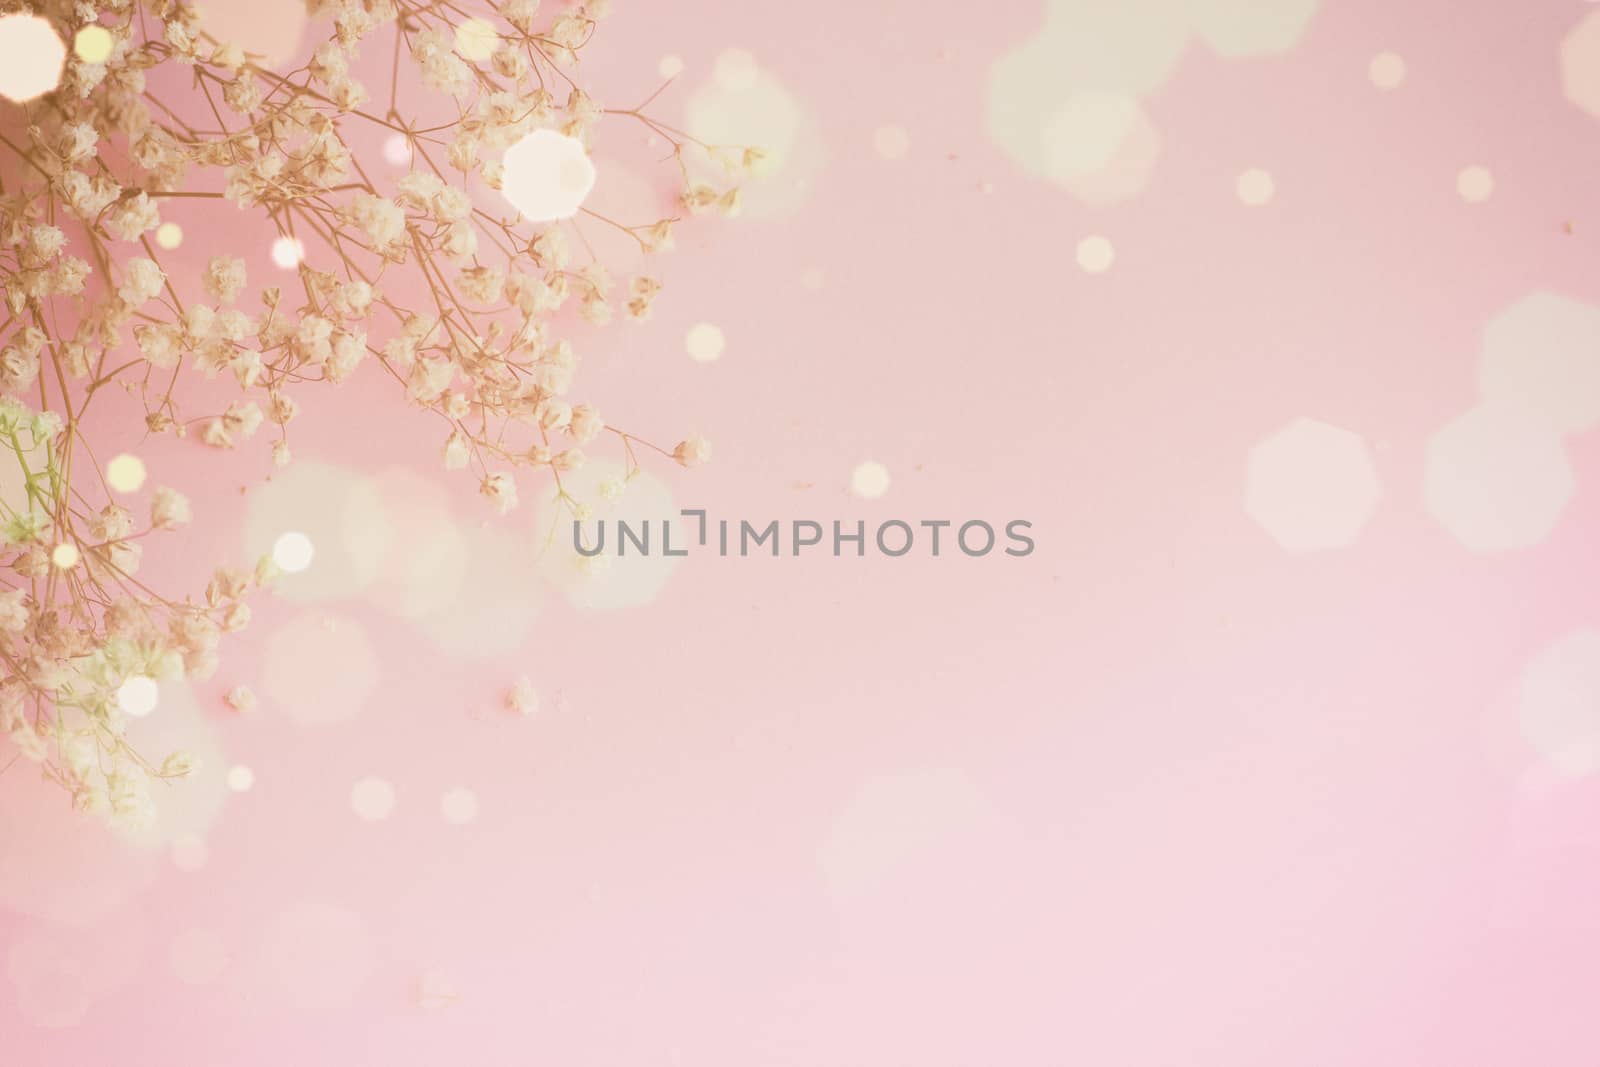 Abstract pink background, small white flowers and glitter; copy space